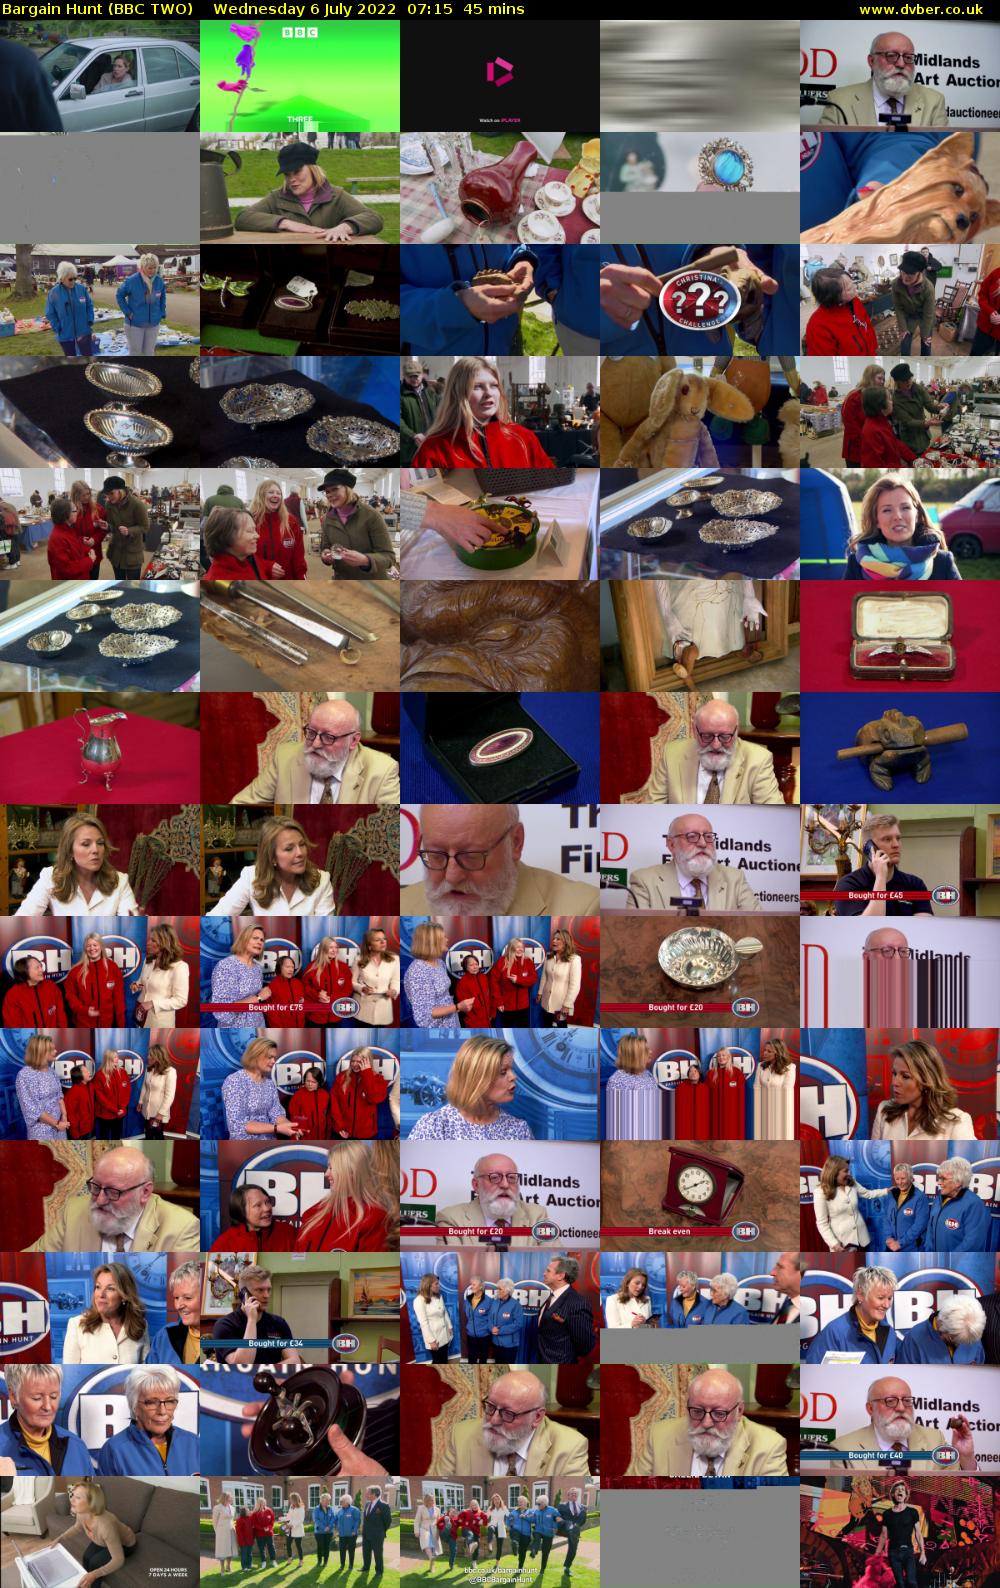 Bargain Hunt (BBC TWO) Wednesday 6 July 2022 07:15 - 08:00